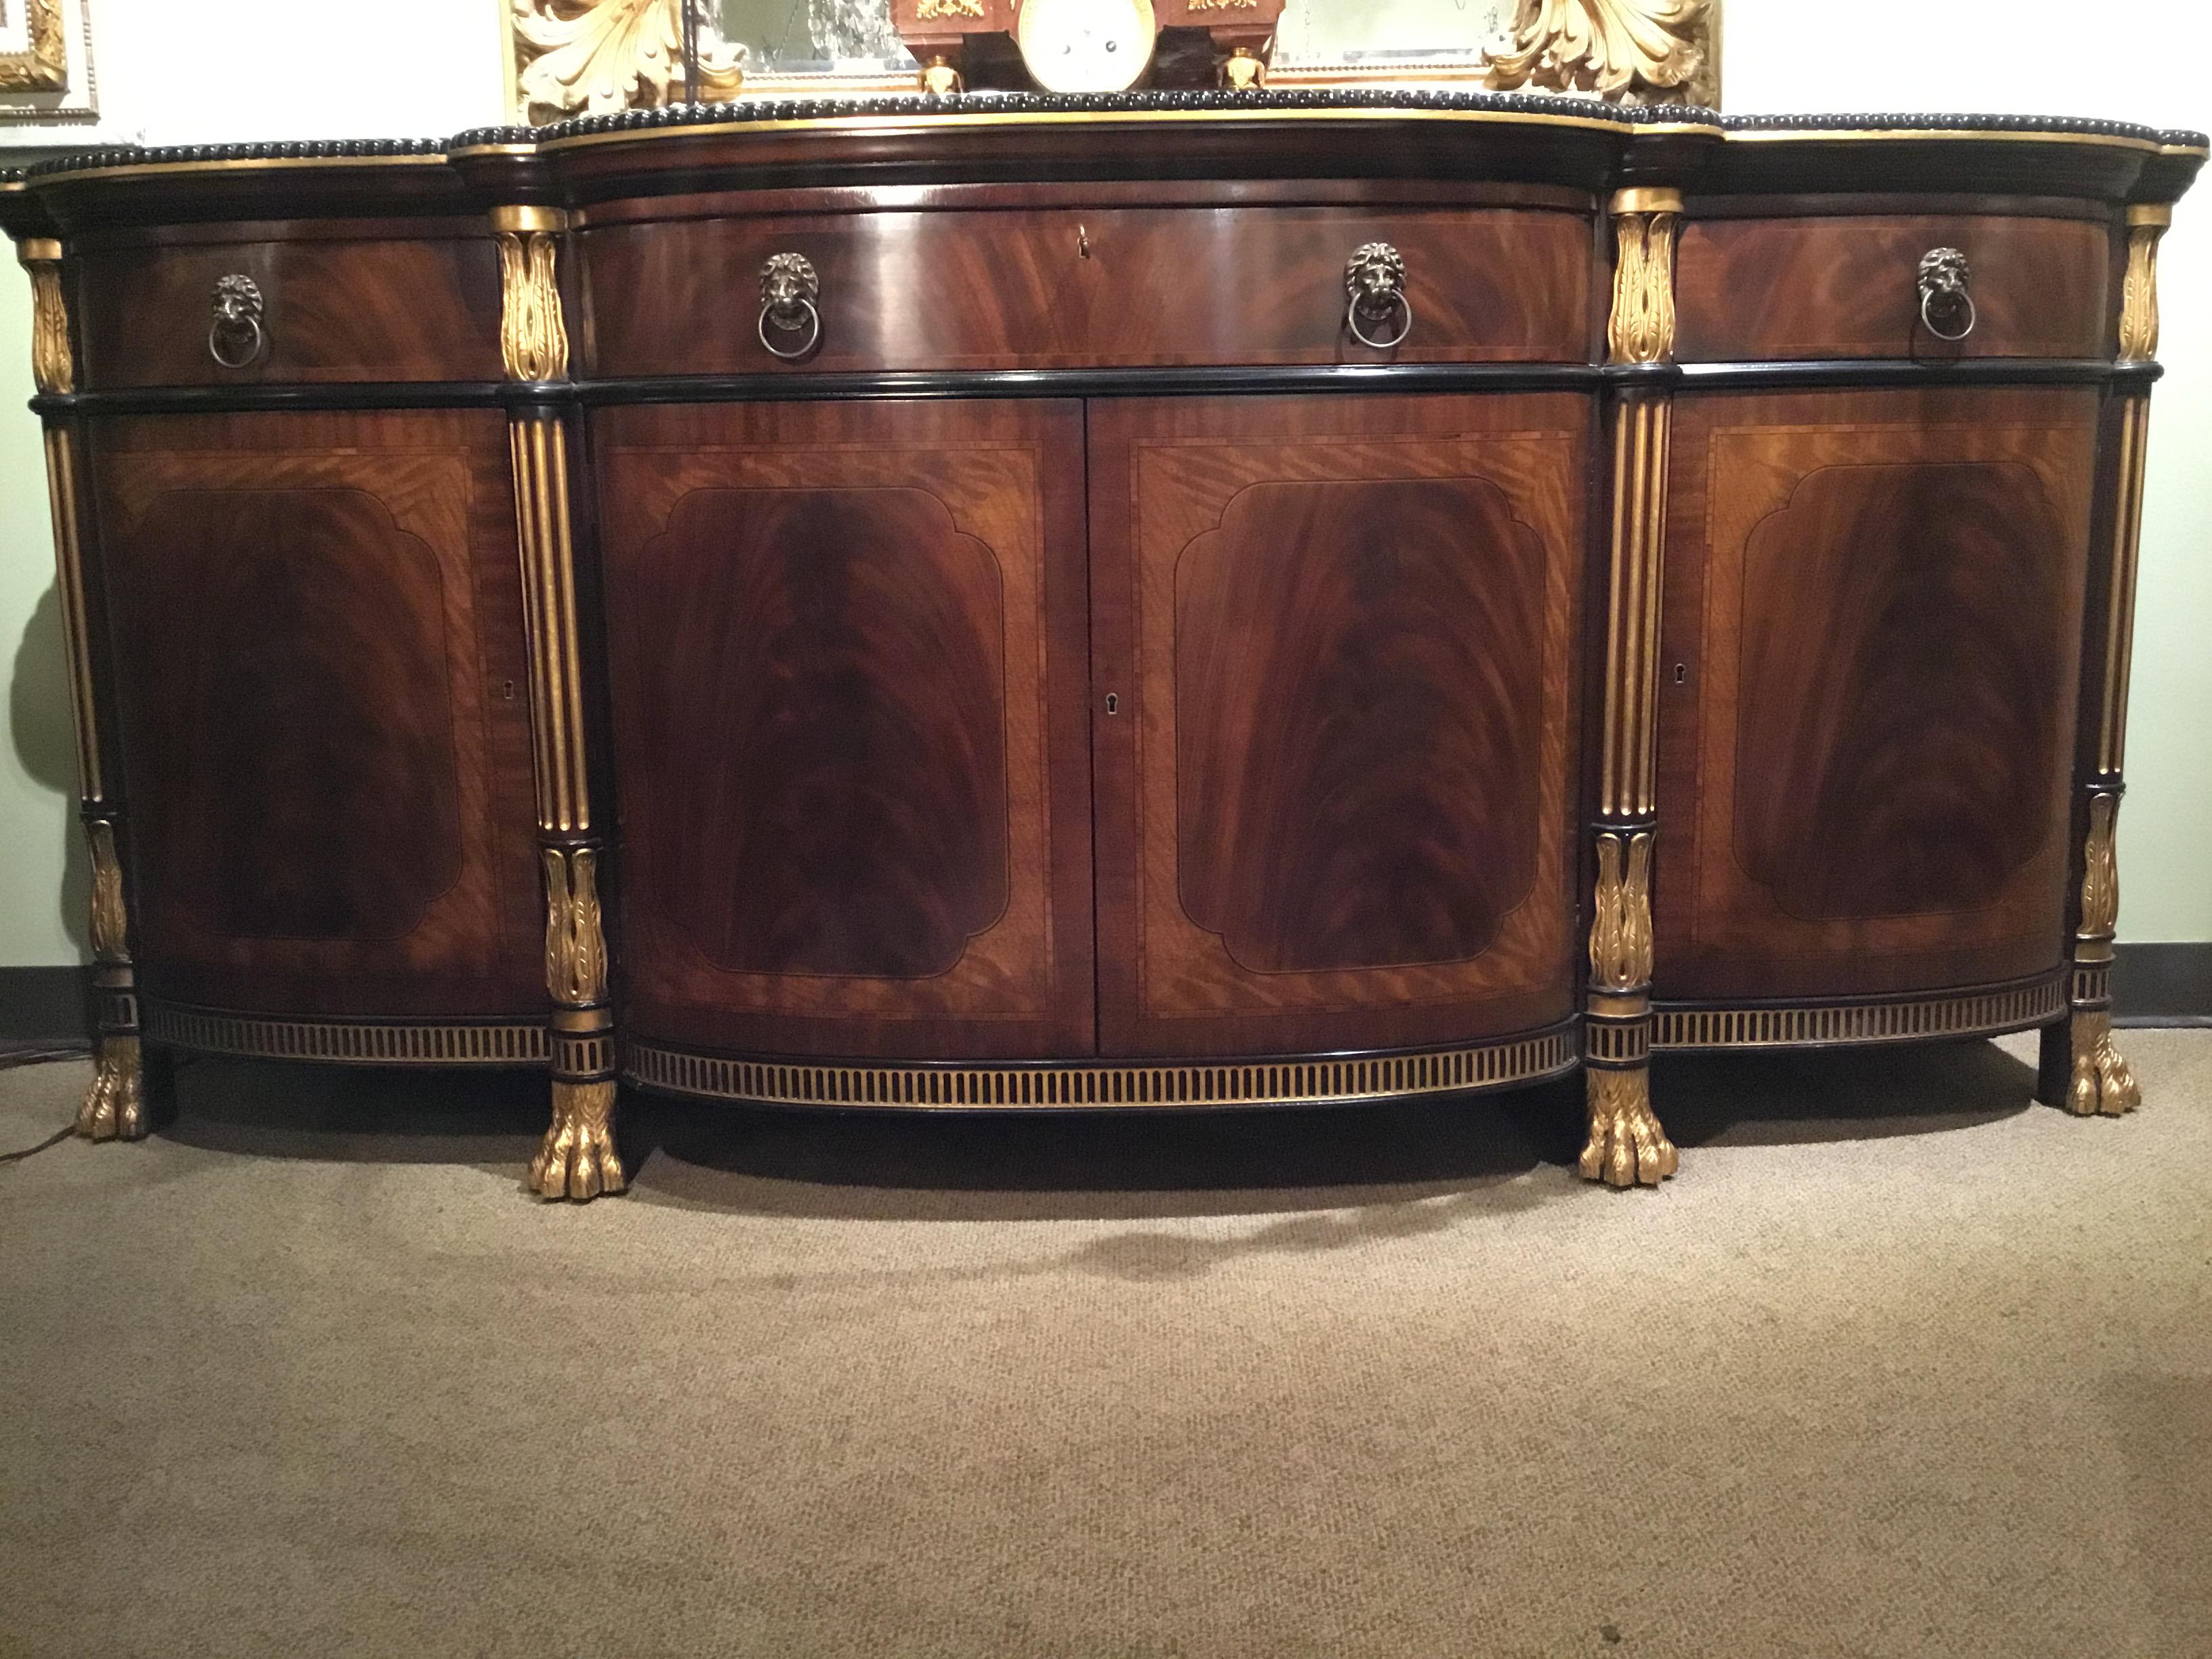 20th Century French Regency Style Buffet/Sideboard, Mahogany Woods and Veneers, Gilt Trim